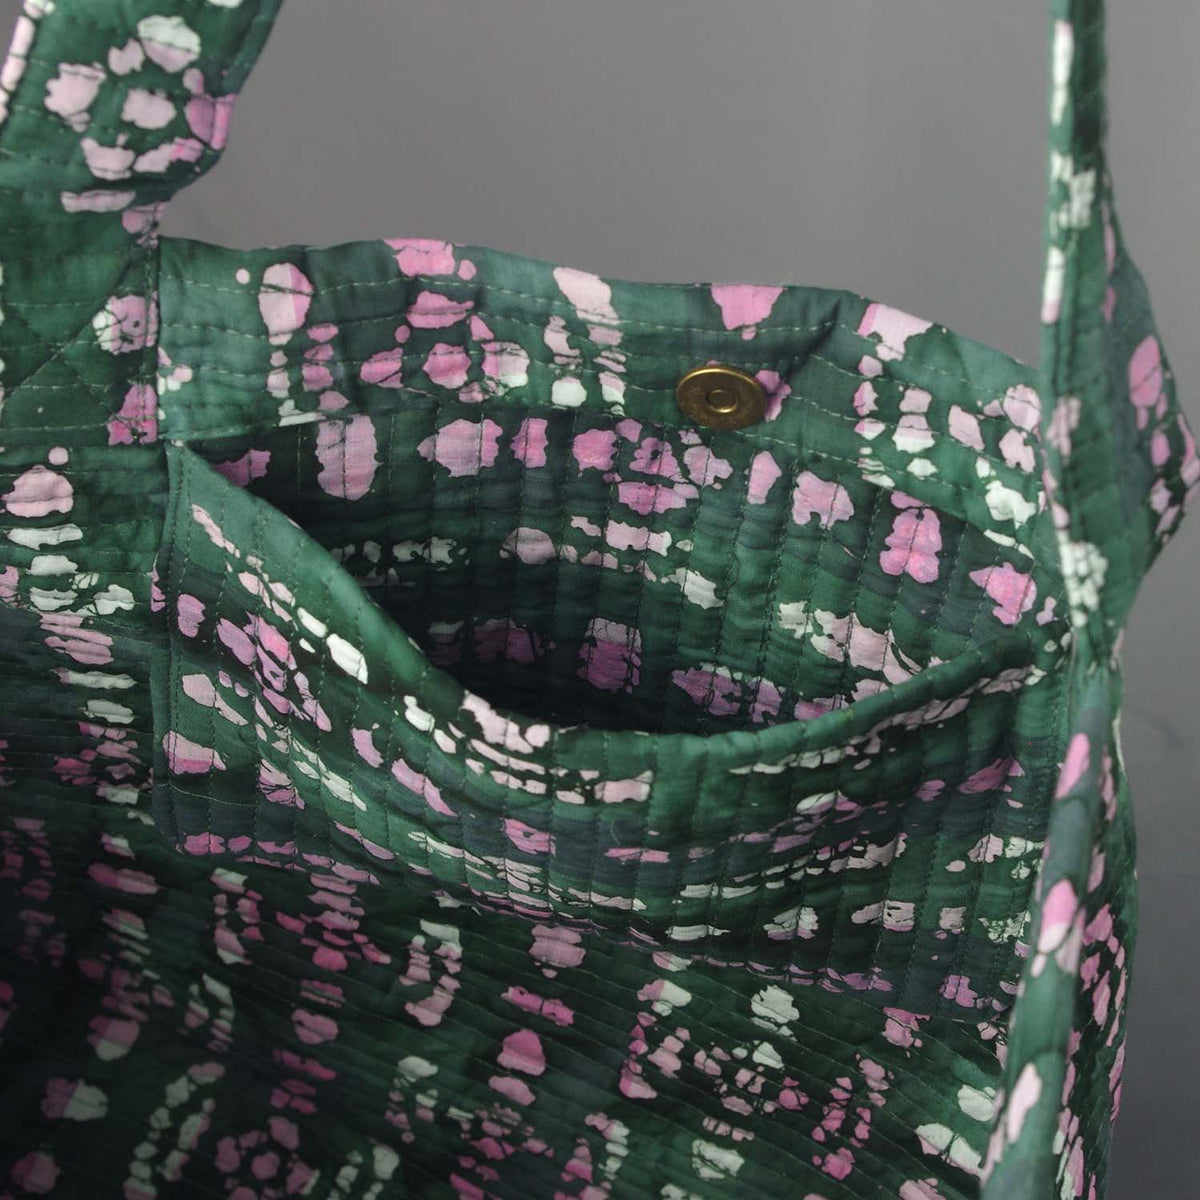 Cotton Quilted Large Shoppping / Beach Bag - Mineral Green And Pink